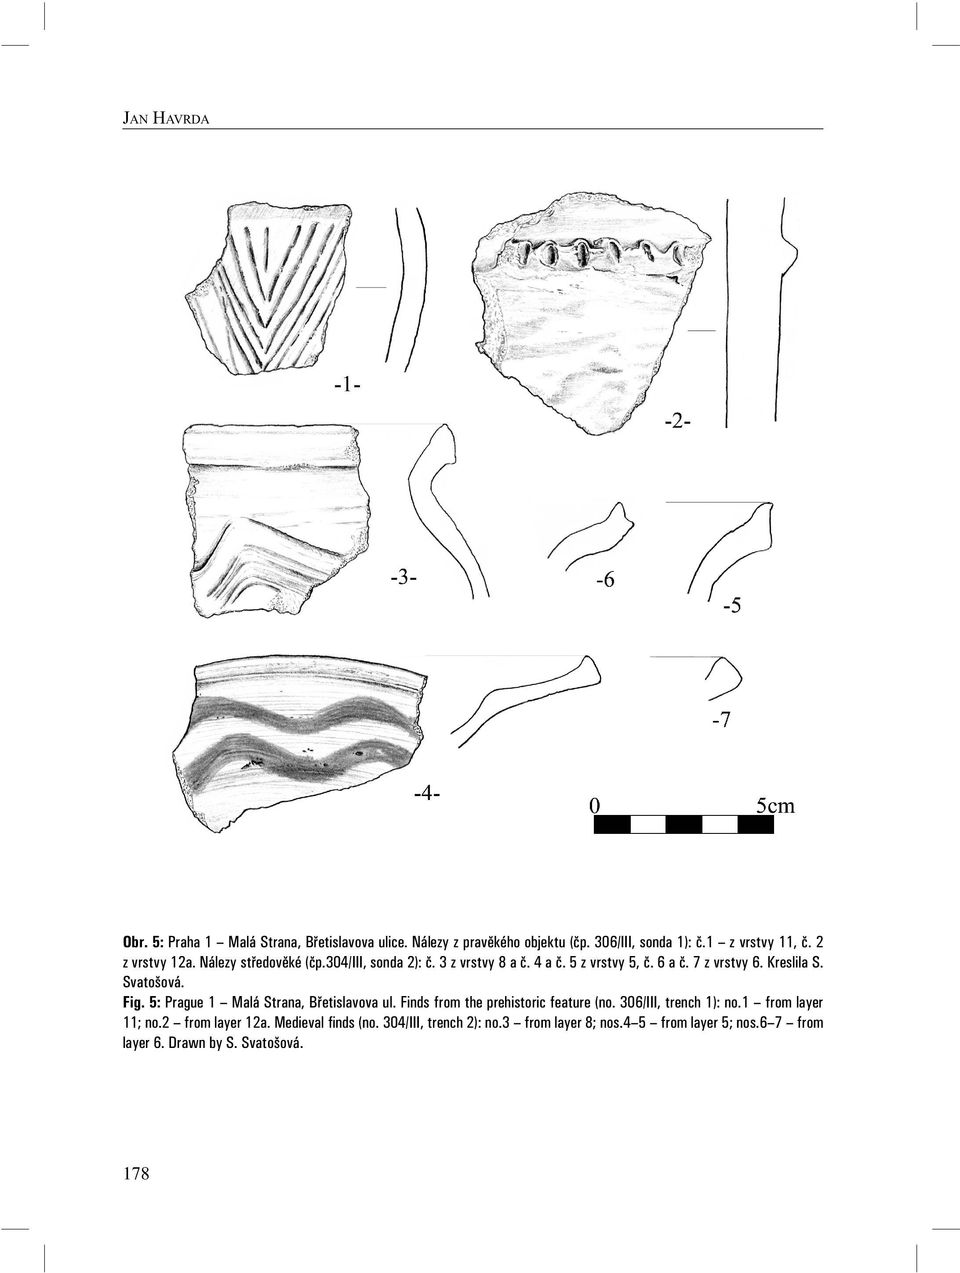 Fig. 5: Prague 1 Malá Strana, B etislavova ul. Finds from the prehistoric feature (no. 306/III, trench 1): no.1 from layer 11; no.